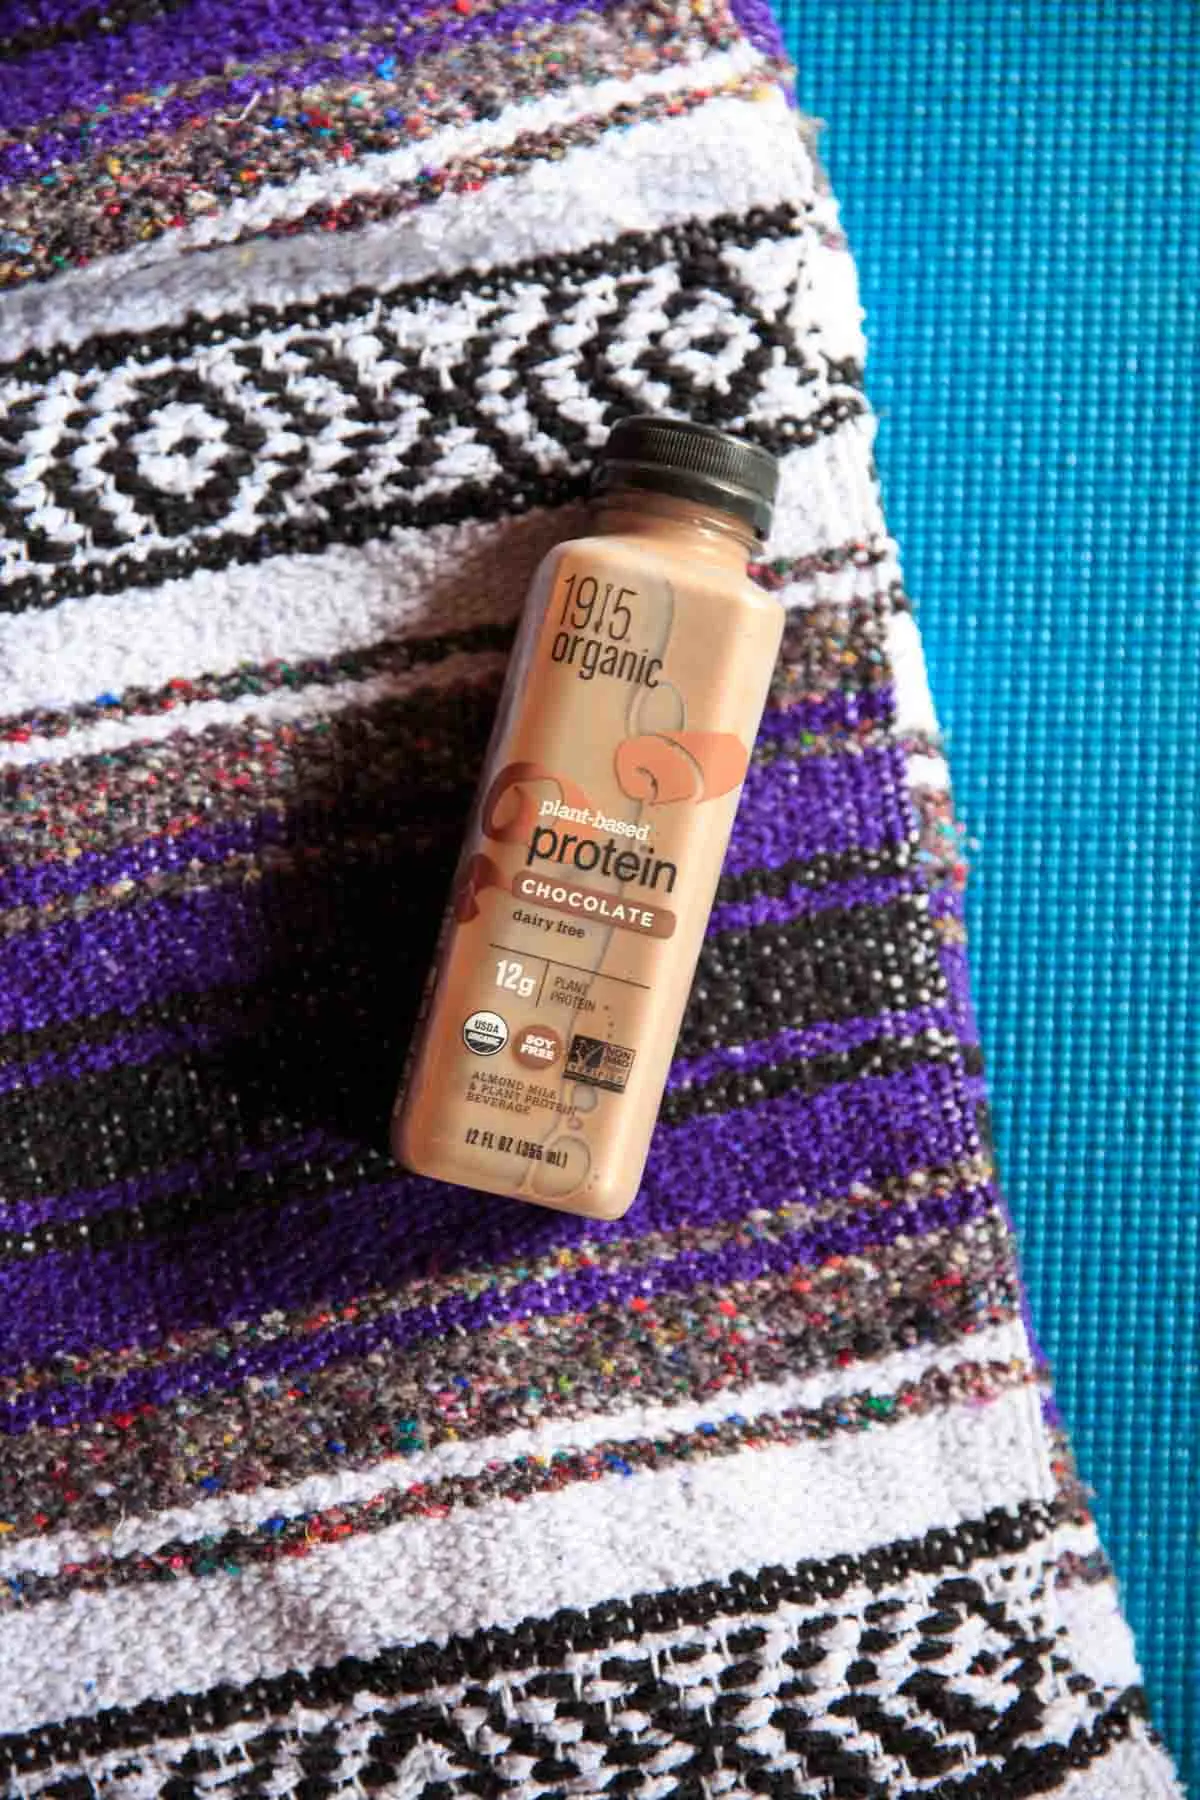 1915 Organic Protein Drink - Chocolate on yoga mat and blanket